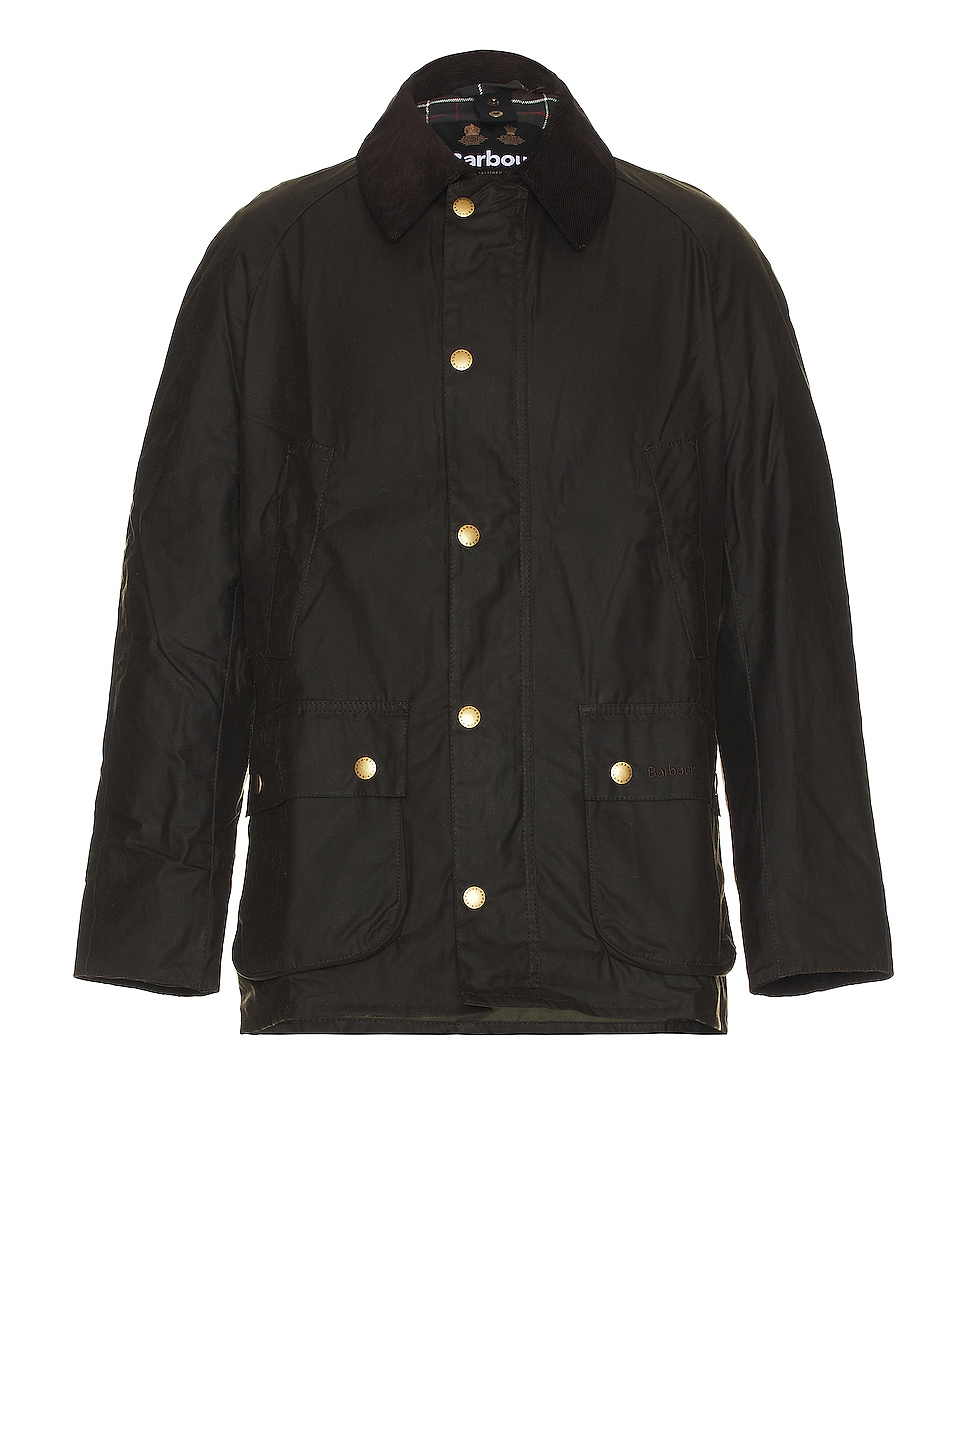 Image 1 of Barbour Ashby Wax Jacket in Olive